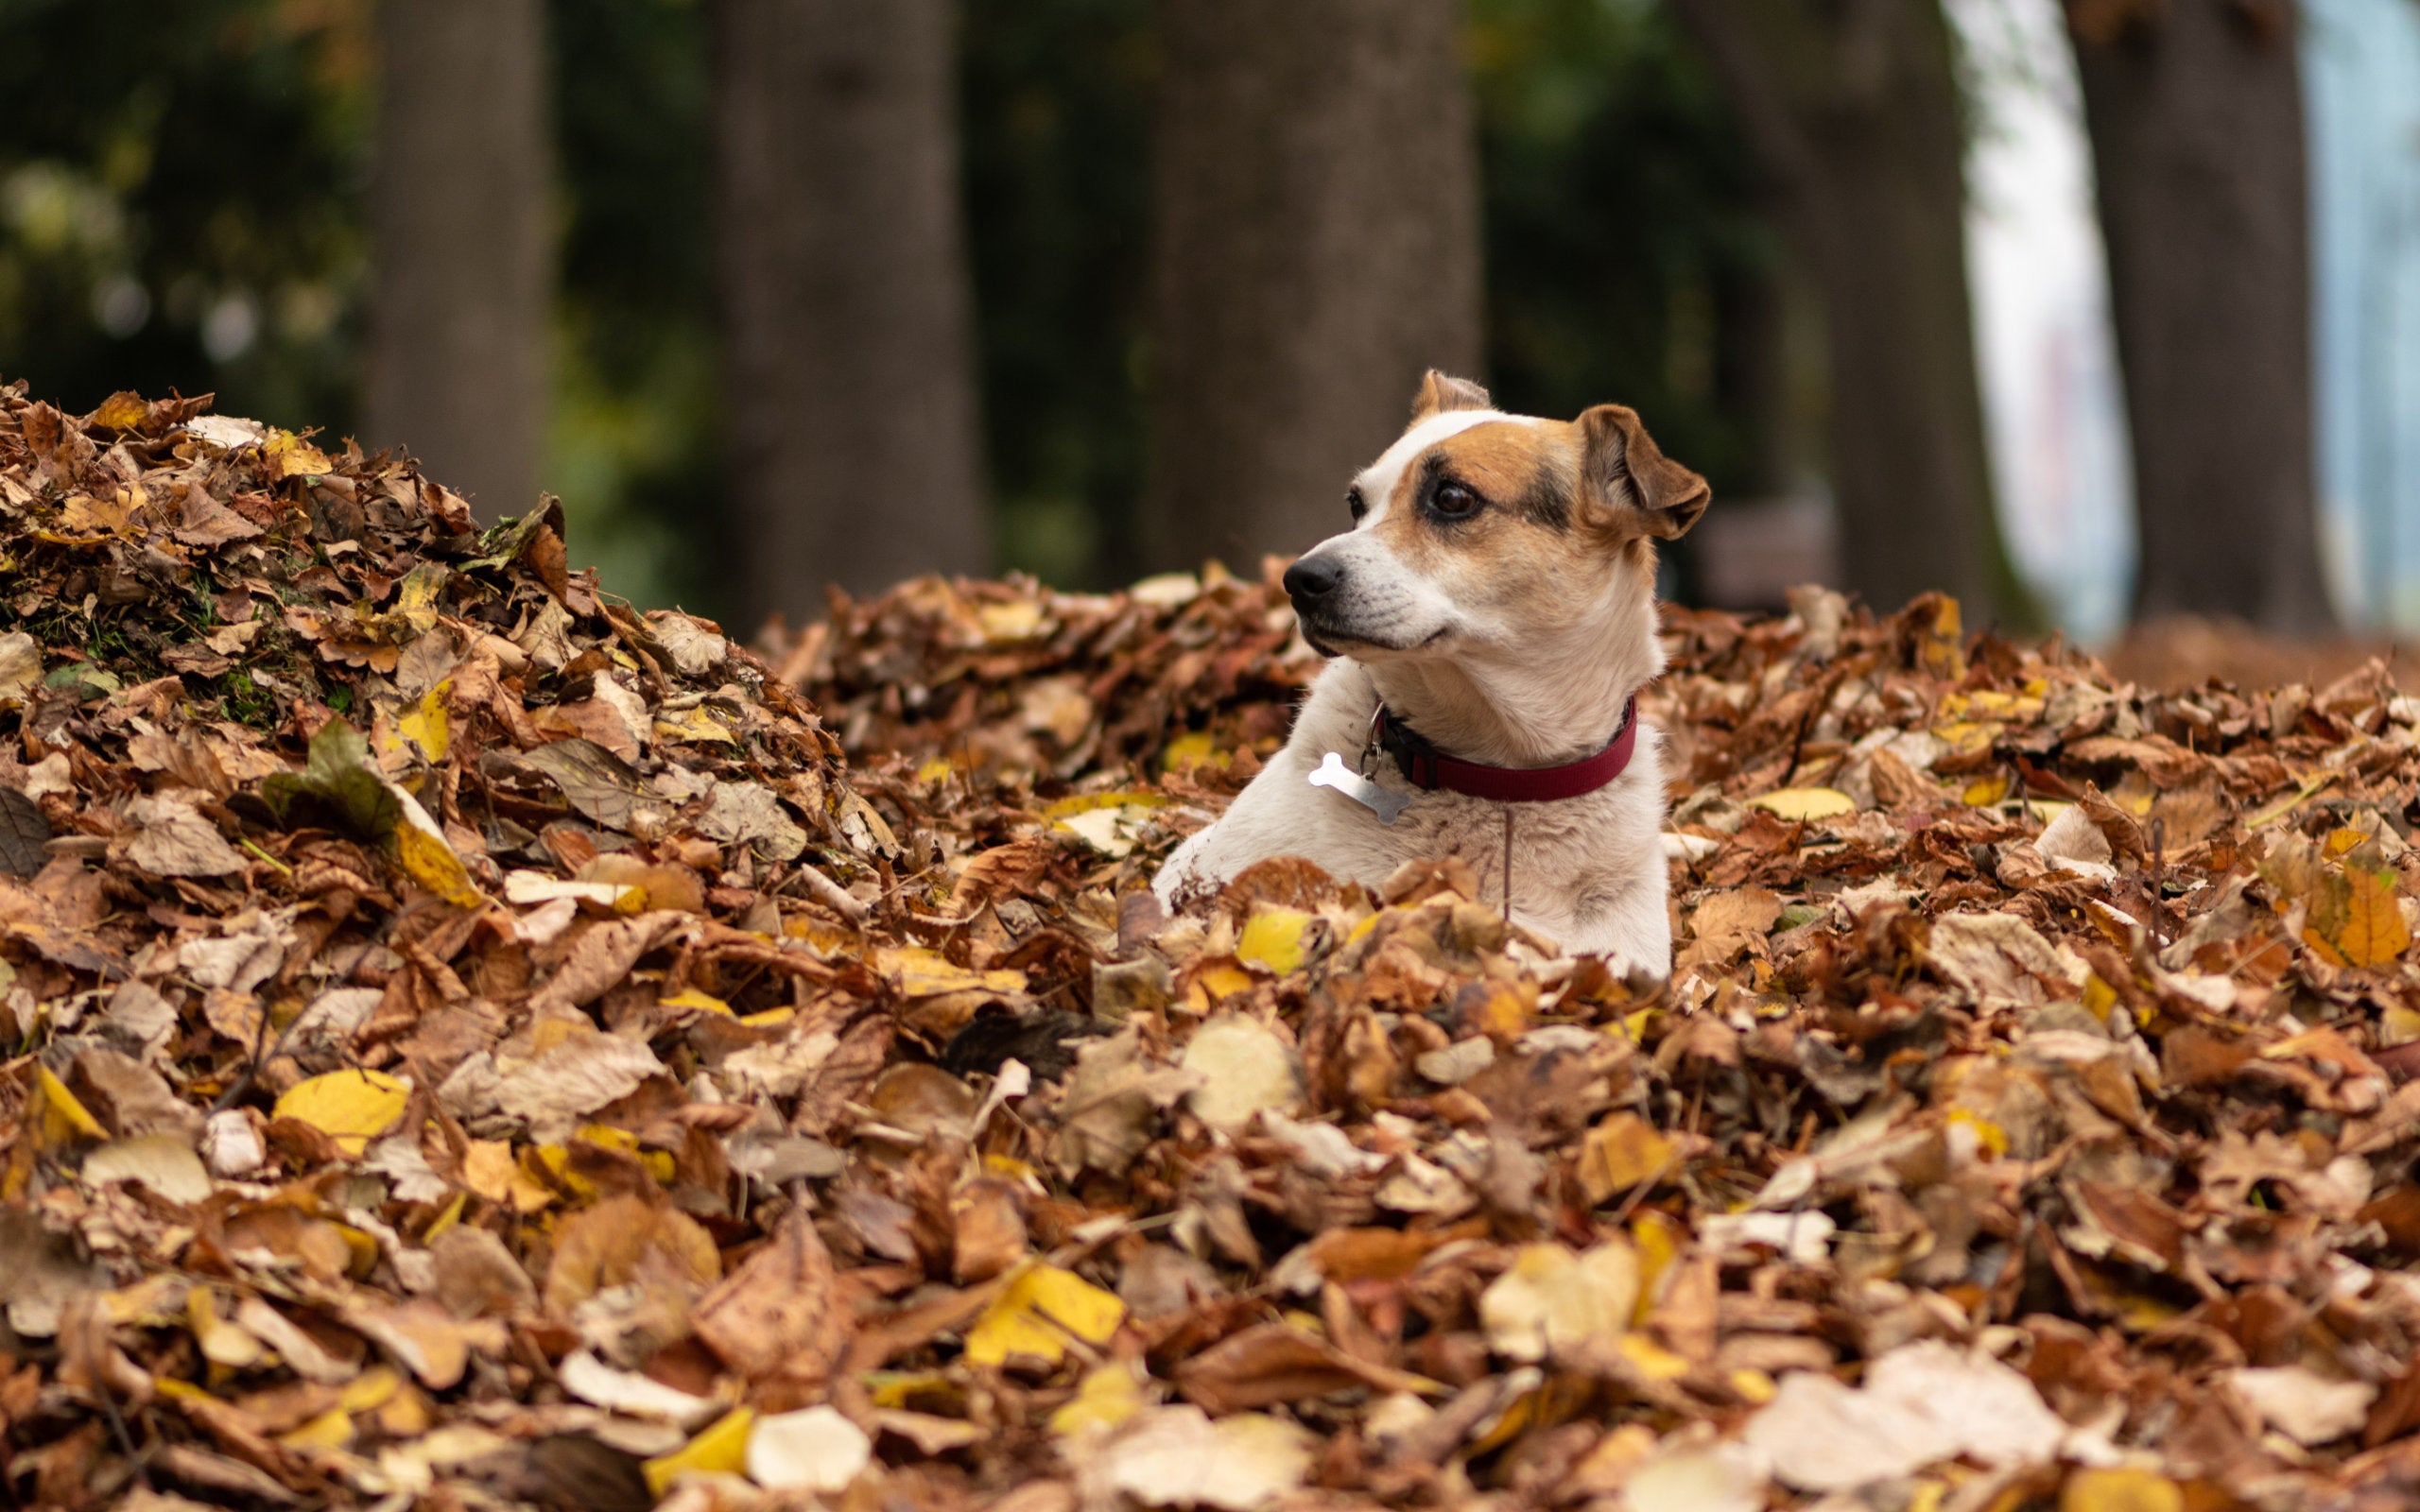 A dog plays in a pile of fall leaves